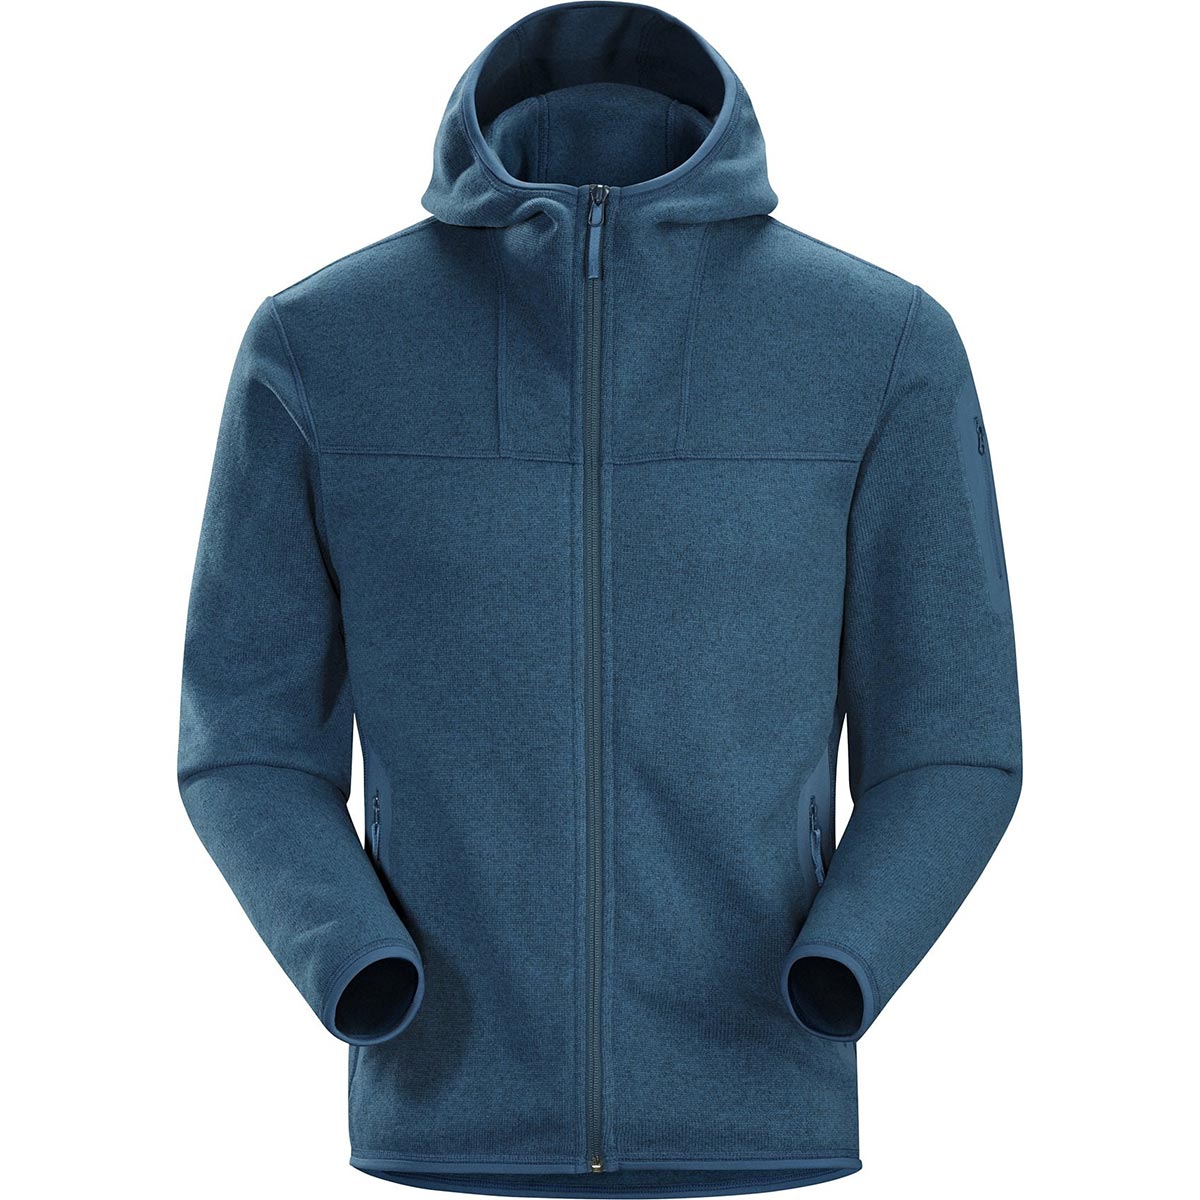 Arc'teryx Covert Hoody, men's, discontinued Fall 2018 colors (free ...